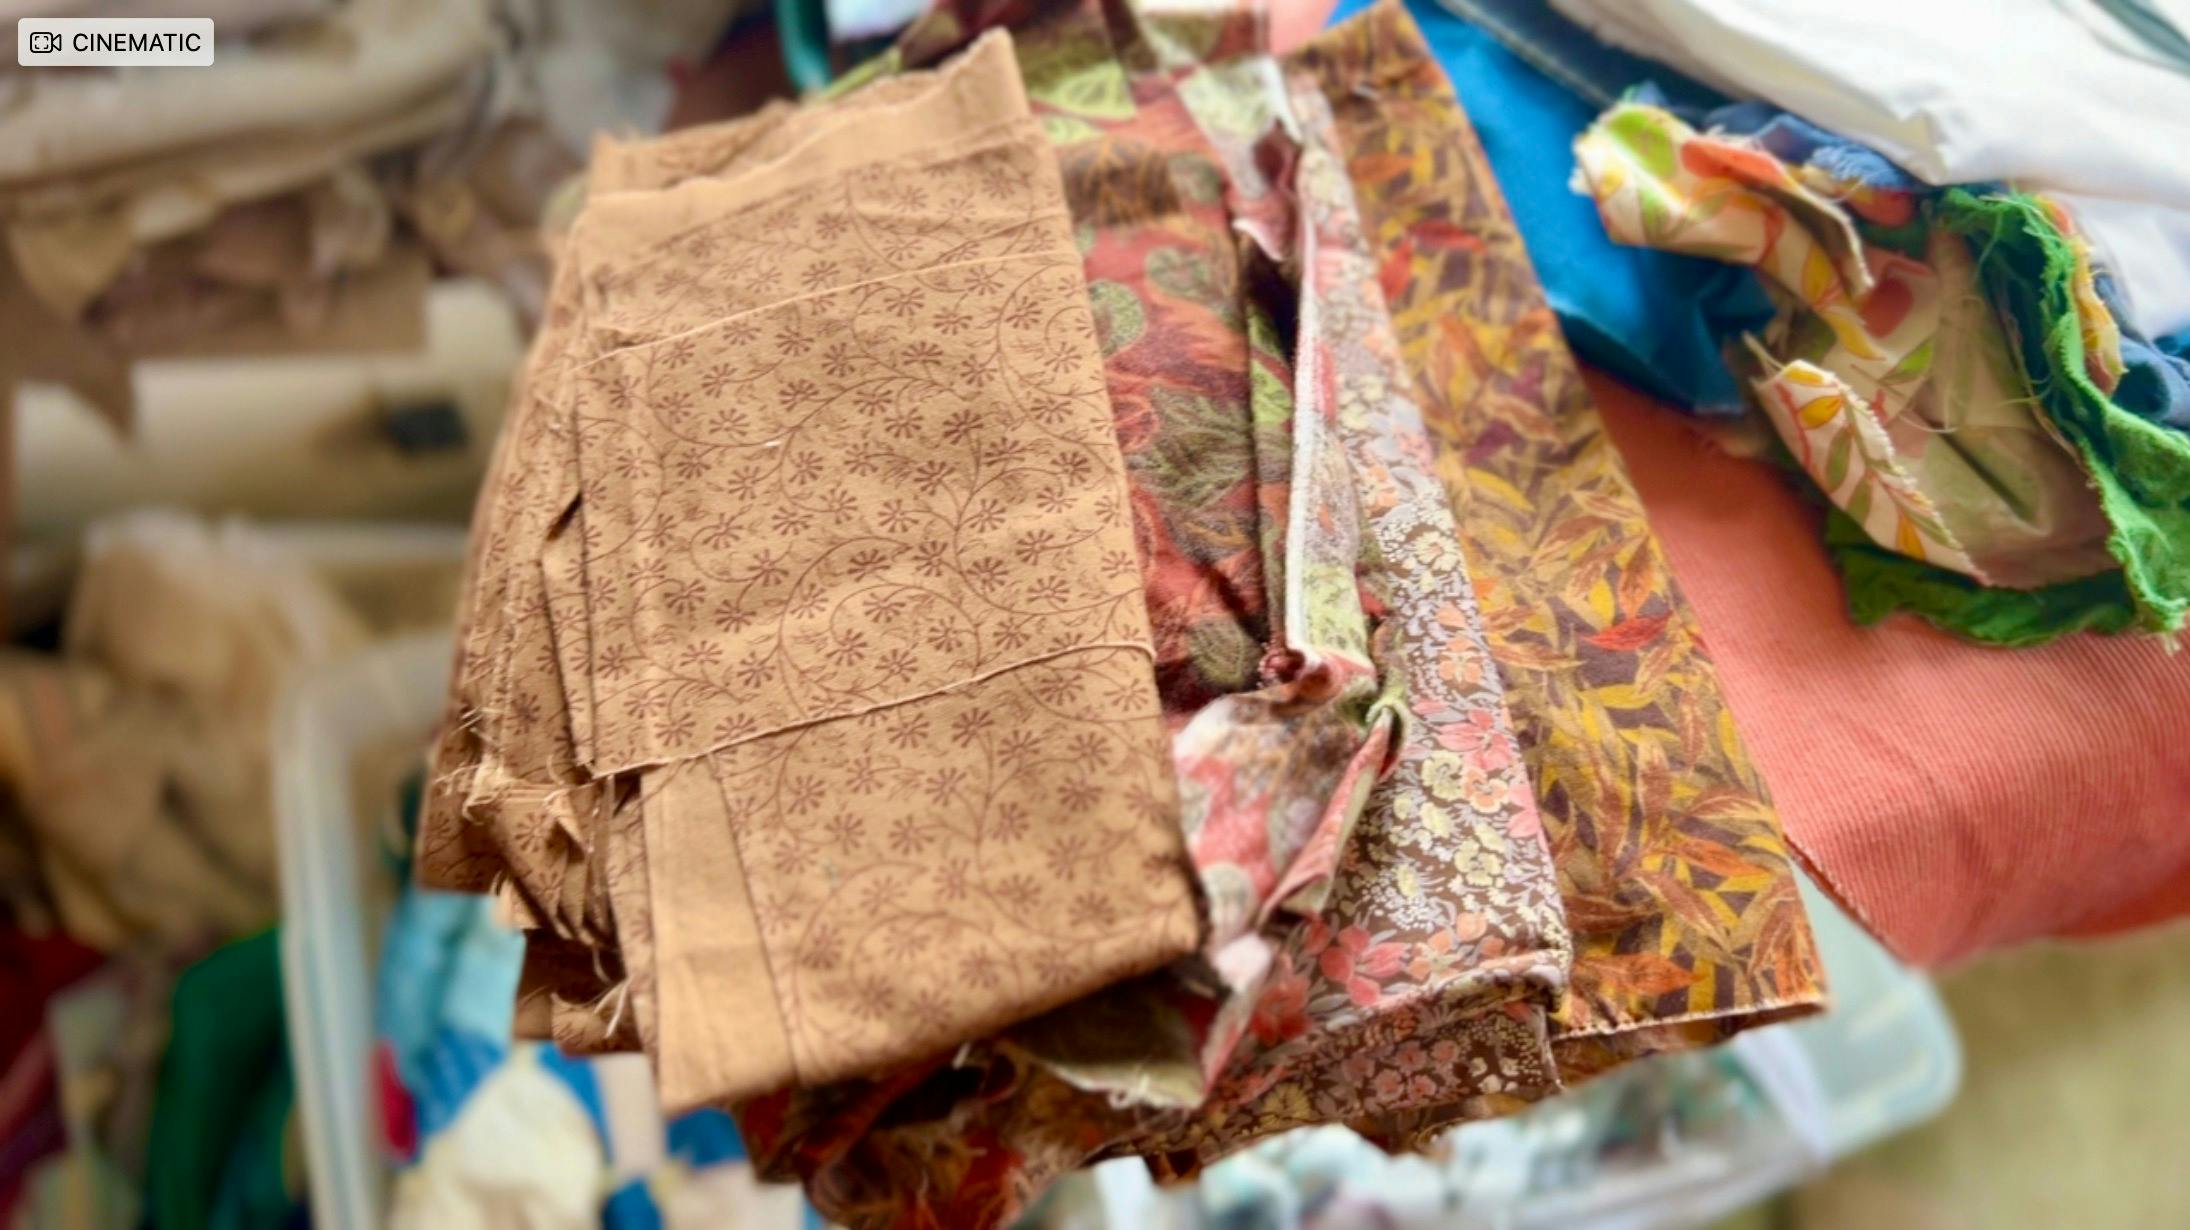 A pile of four kinds of brown fabric with floral patterns on them.